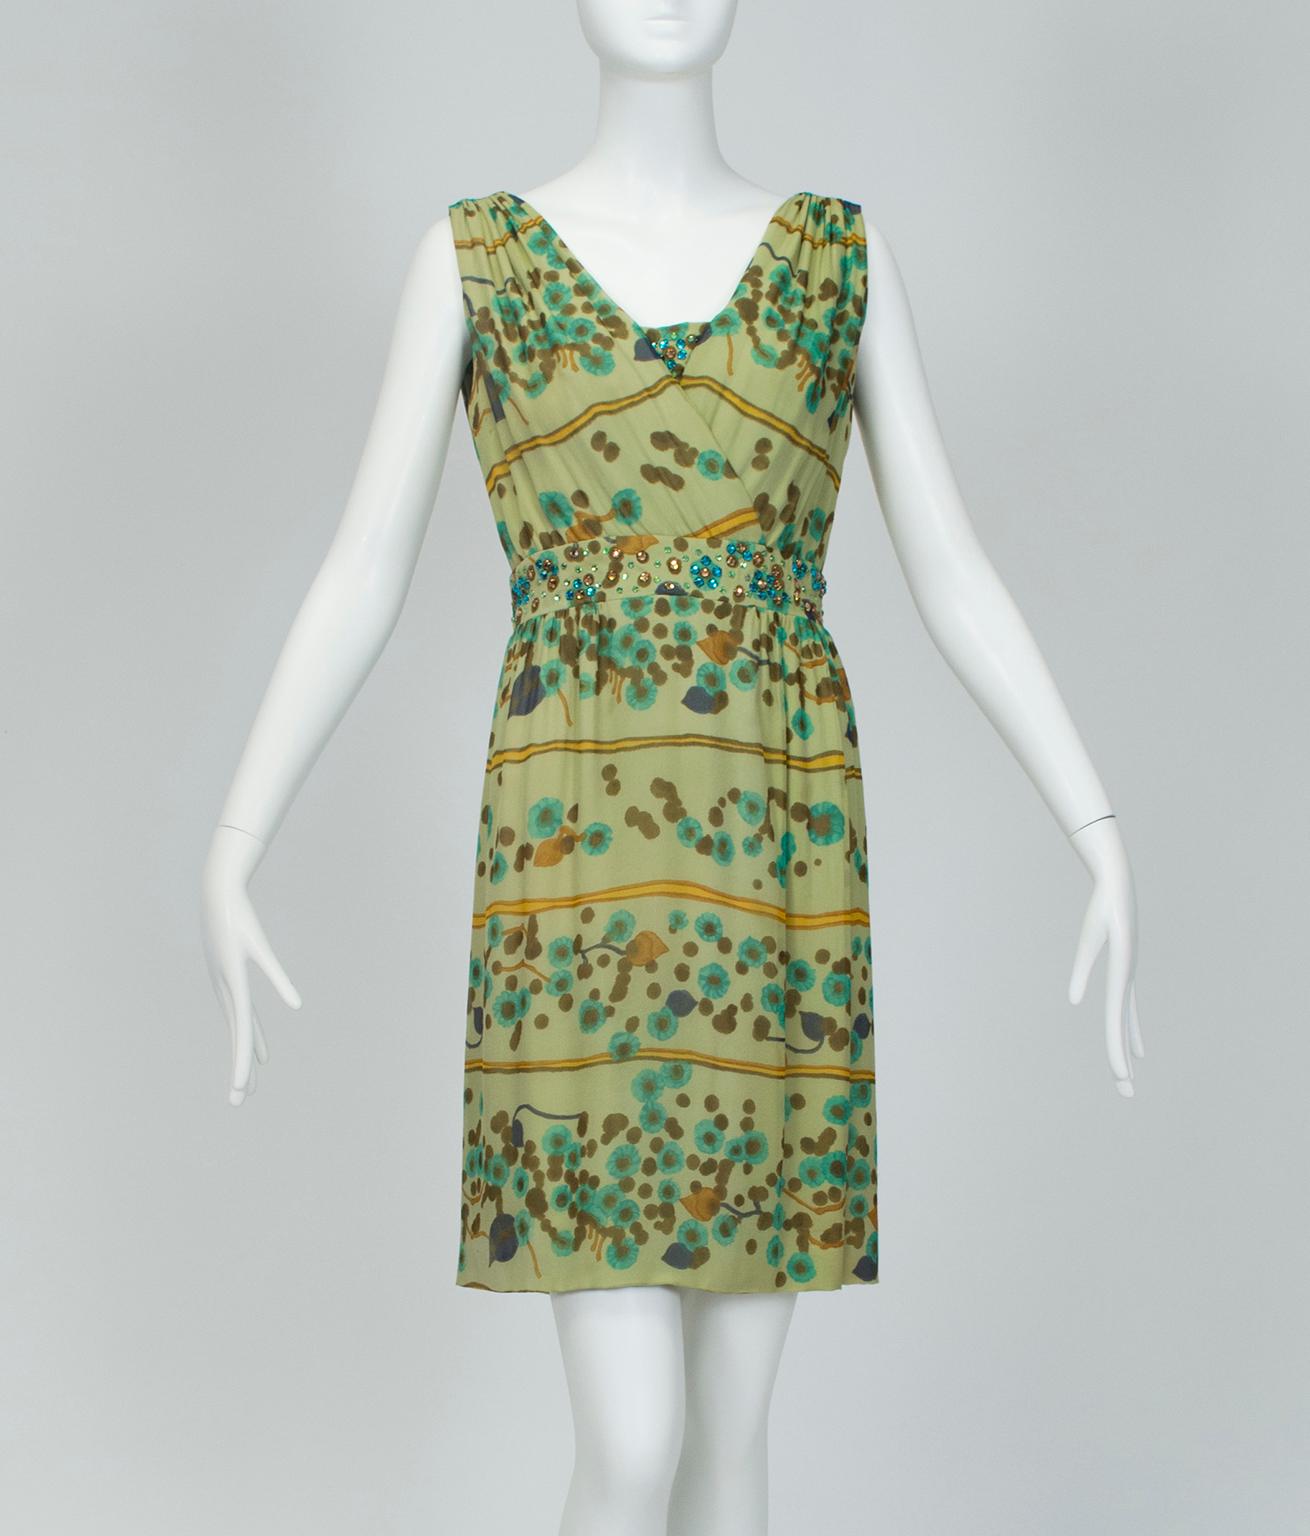 Despite its whisper weight chiffon, this eye-catching shift packs a wallop thanks to a shower of green gemstones and a modern green watercolor print. Perfect for warm spring and summer days when polish is a priority.

Sleeveless surplice bodice